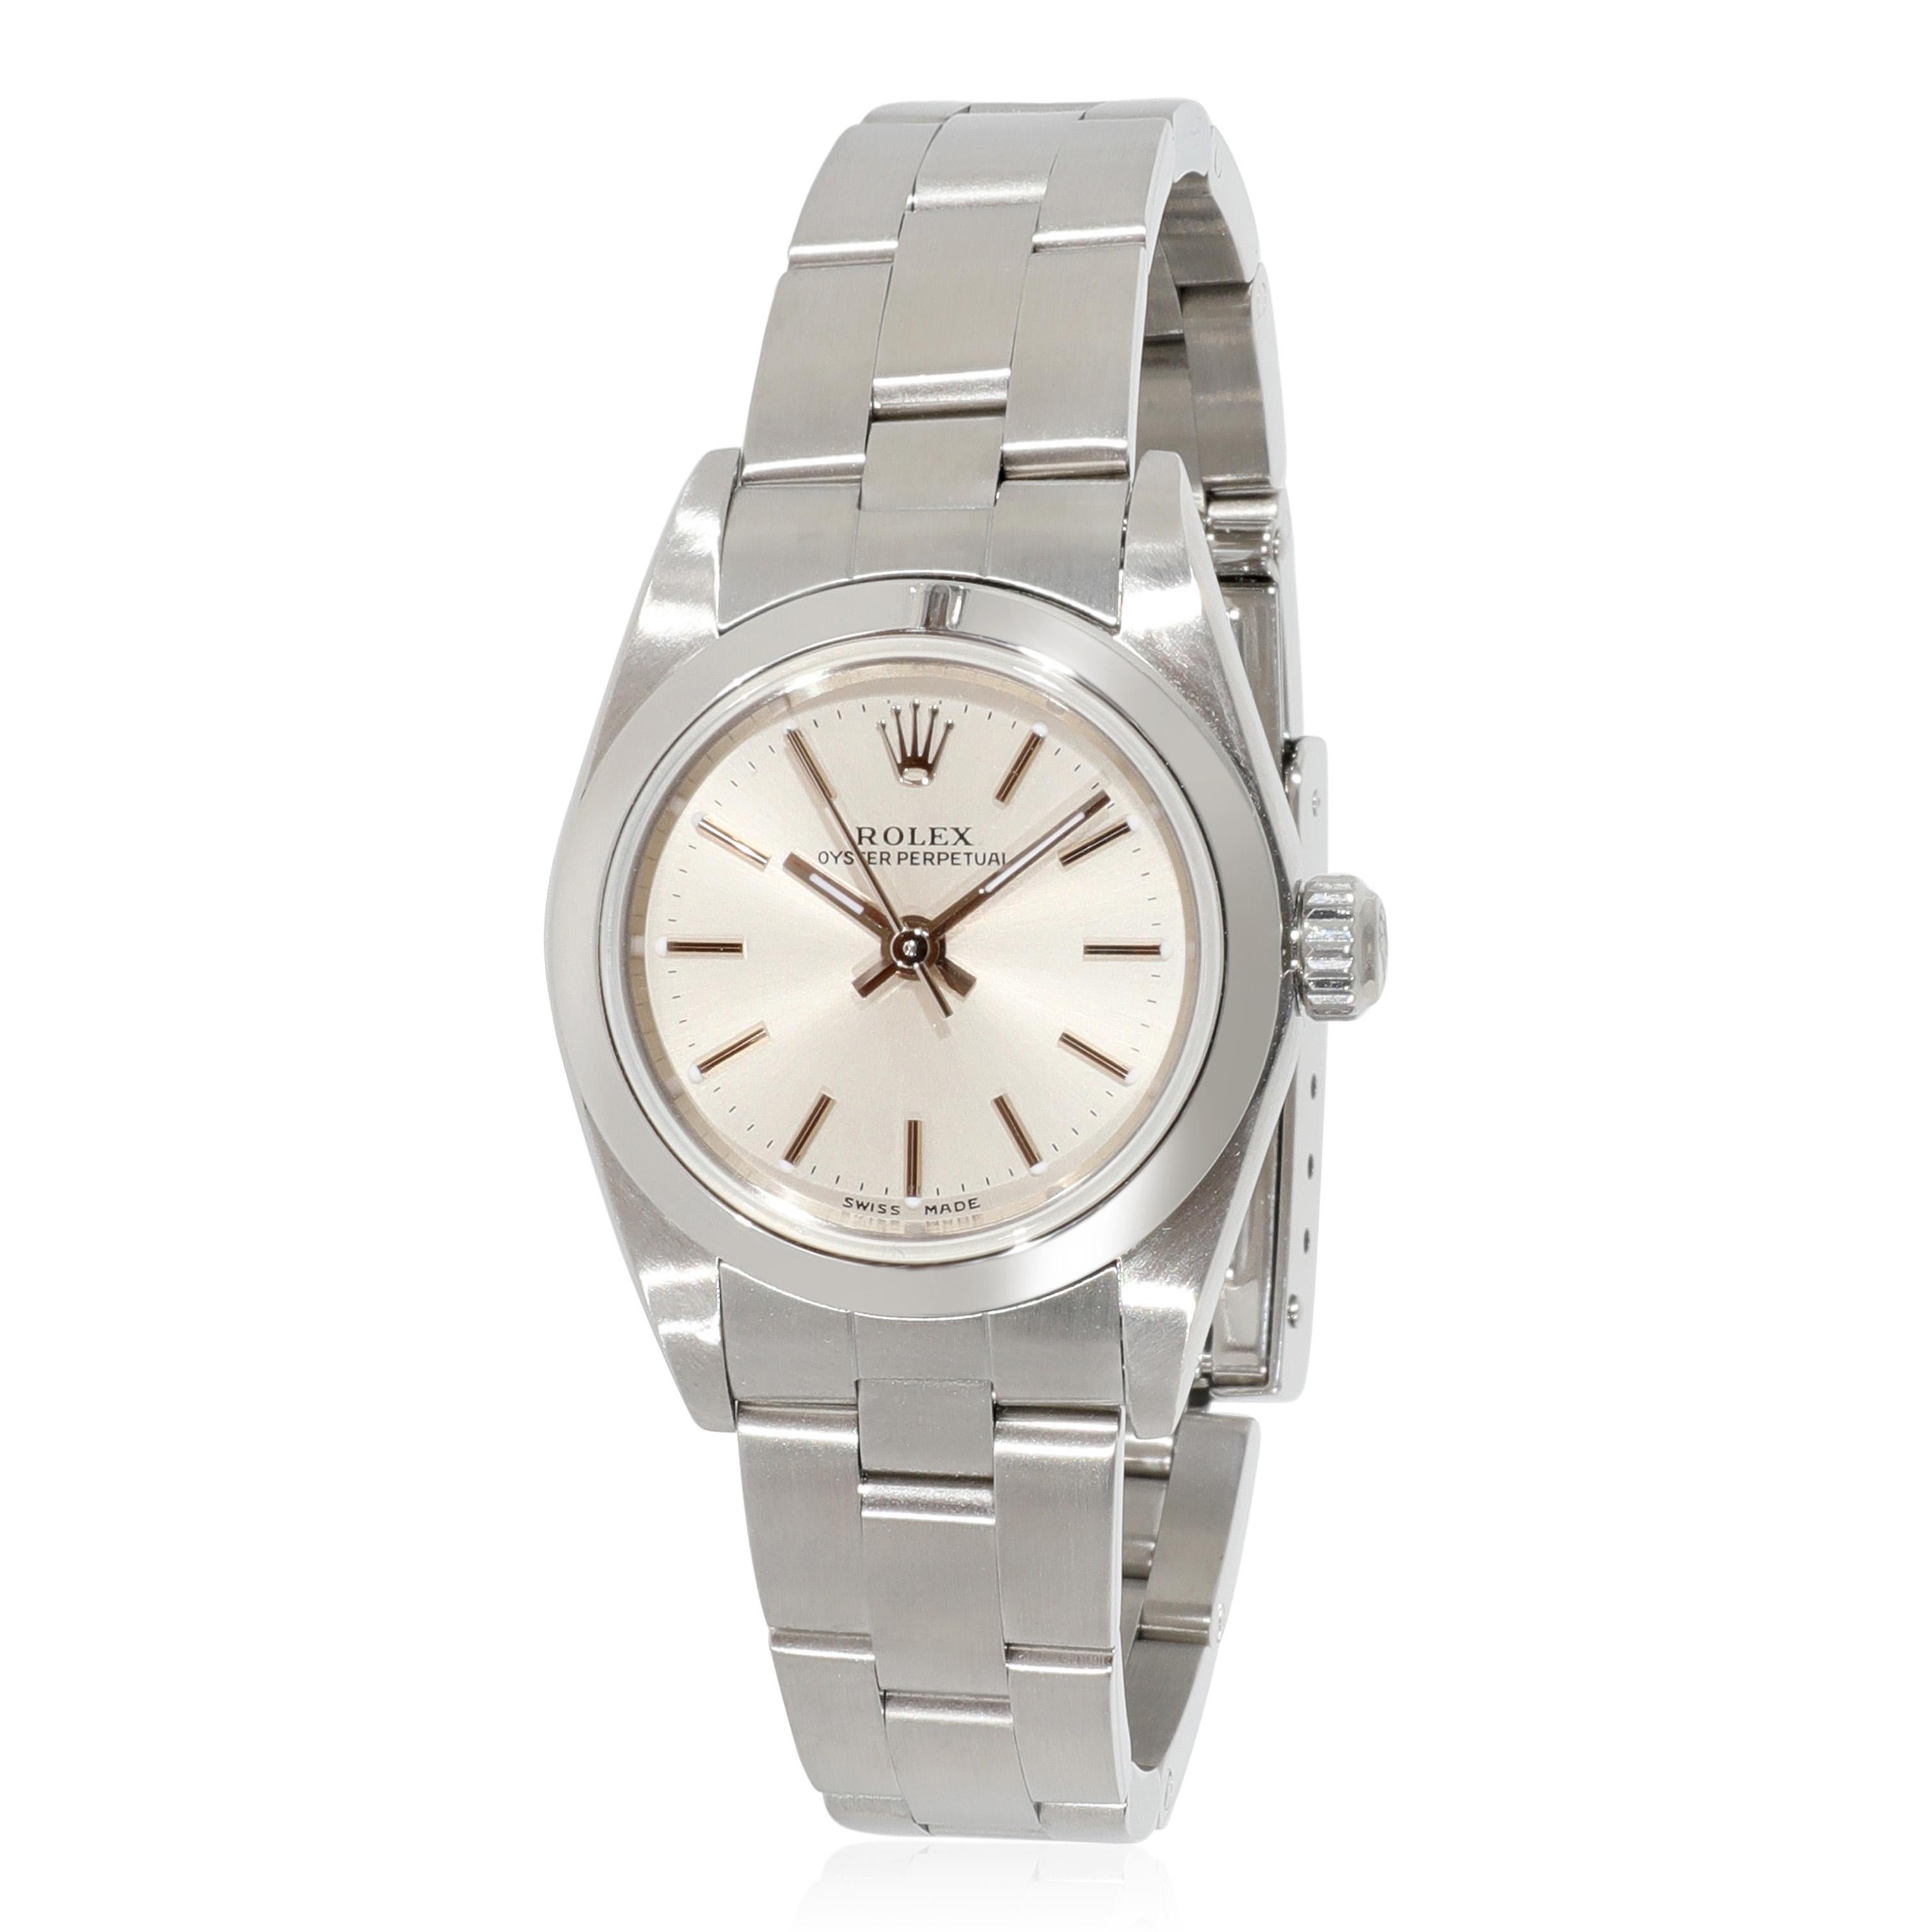 Rolex Oyster Perpetual 76080 Women's Watch in Stainless Steel 1